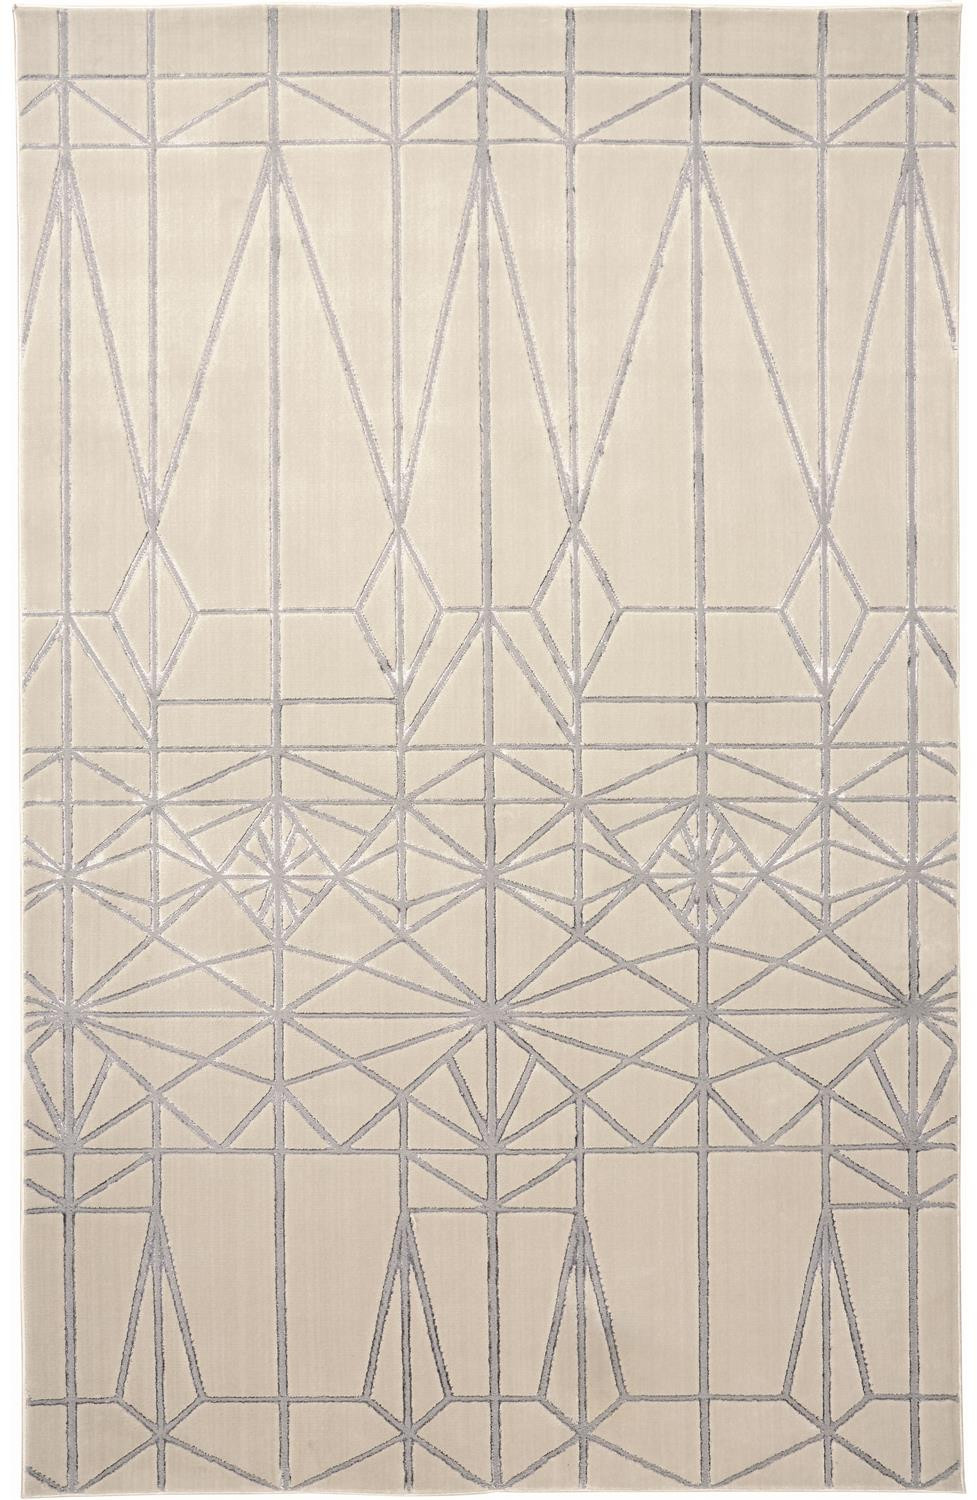 10' X 13' White Silver And Gray Geometric Stain Resistant Area Rug-511480-1